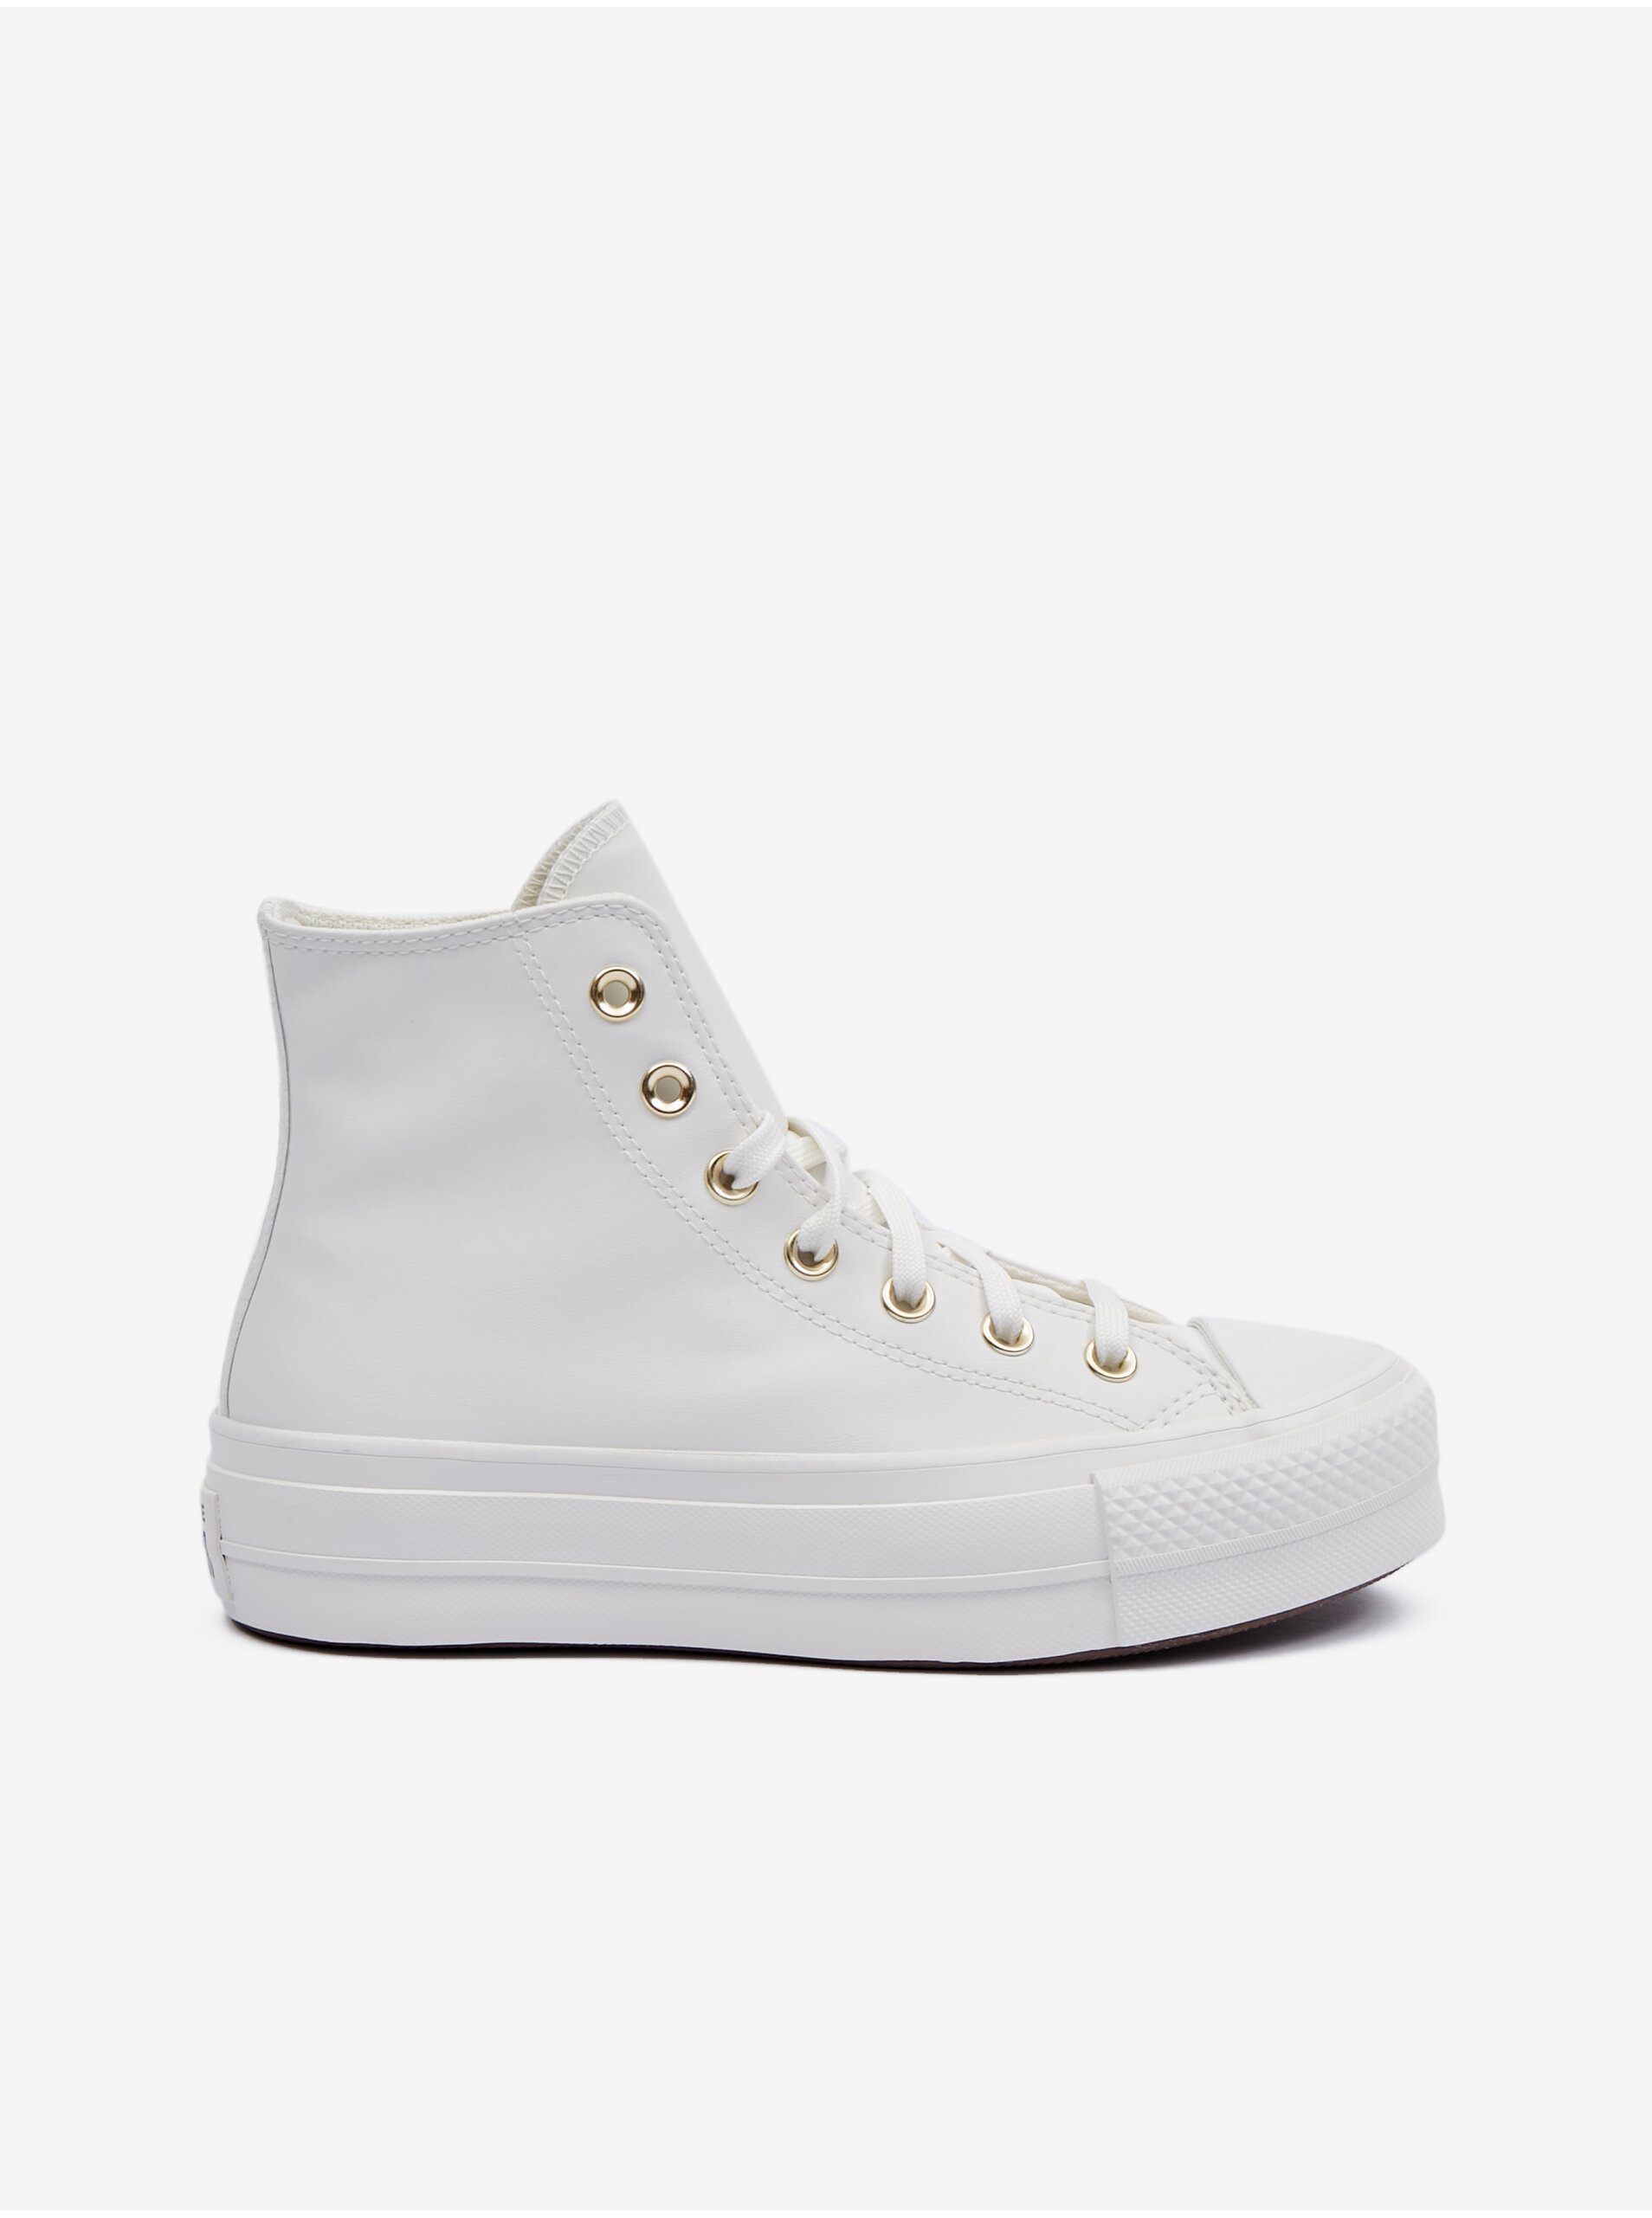 Converse Chuck Taylor All Star Lift Womens Ankle Sneakers - Womens